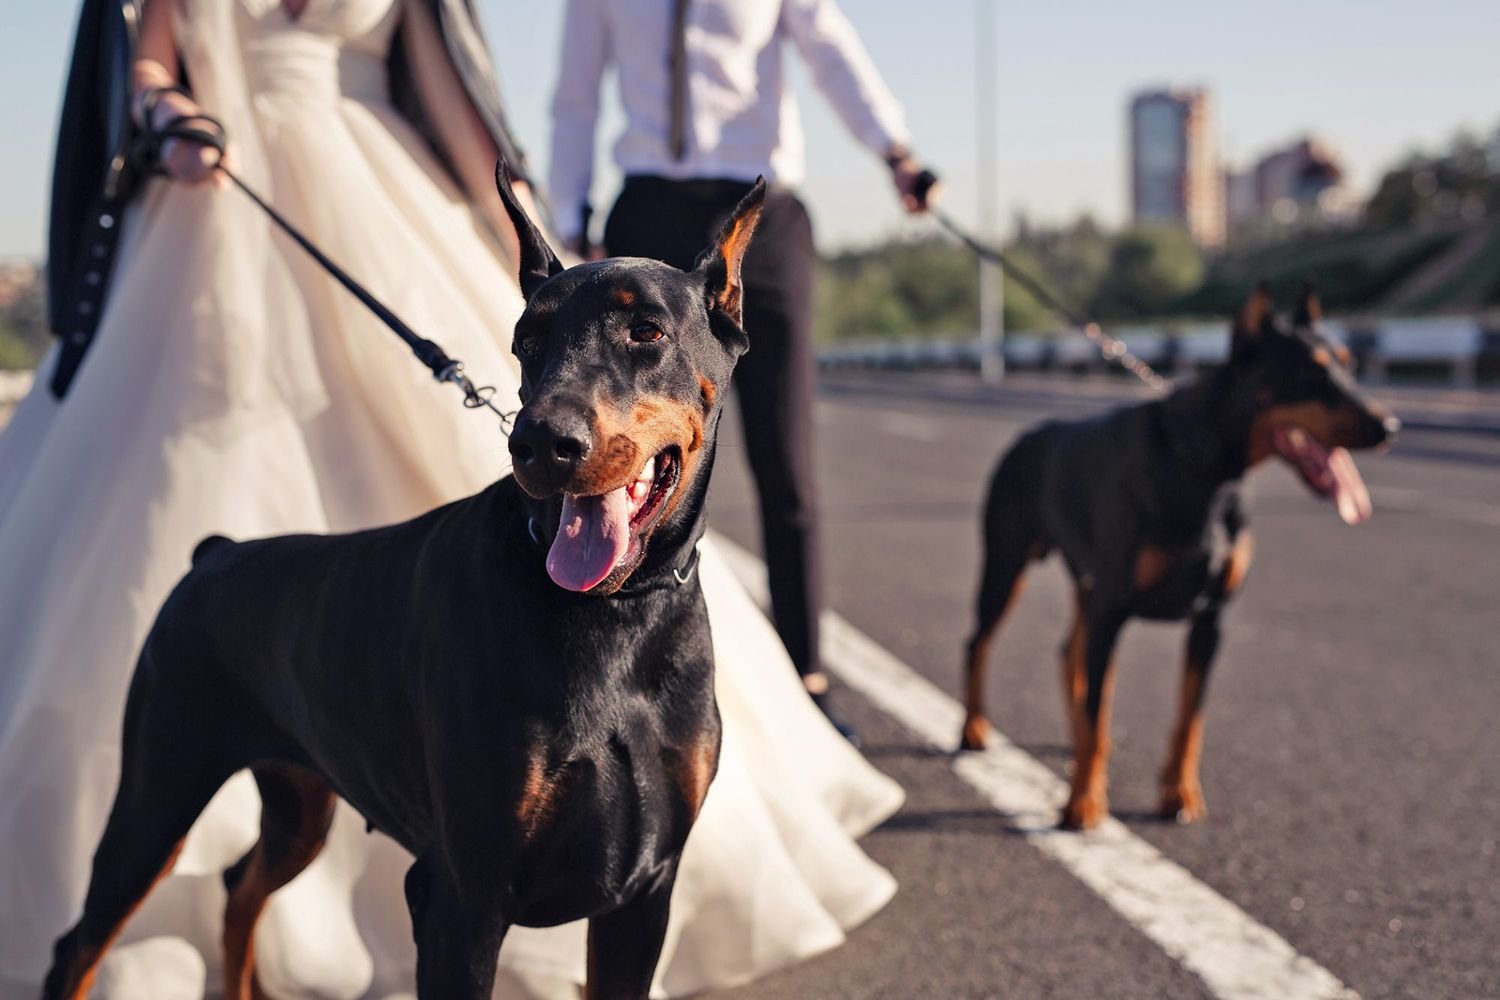 Yes, It's True: Your Dog Can Be Your Official Wedding Witness